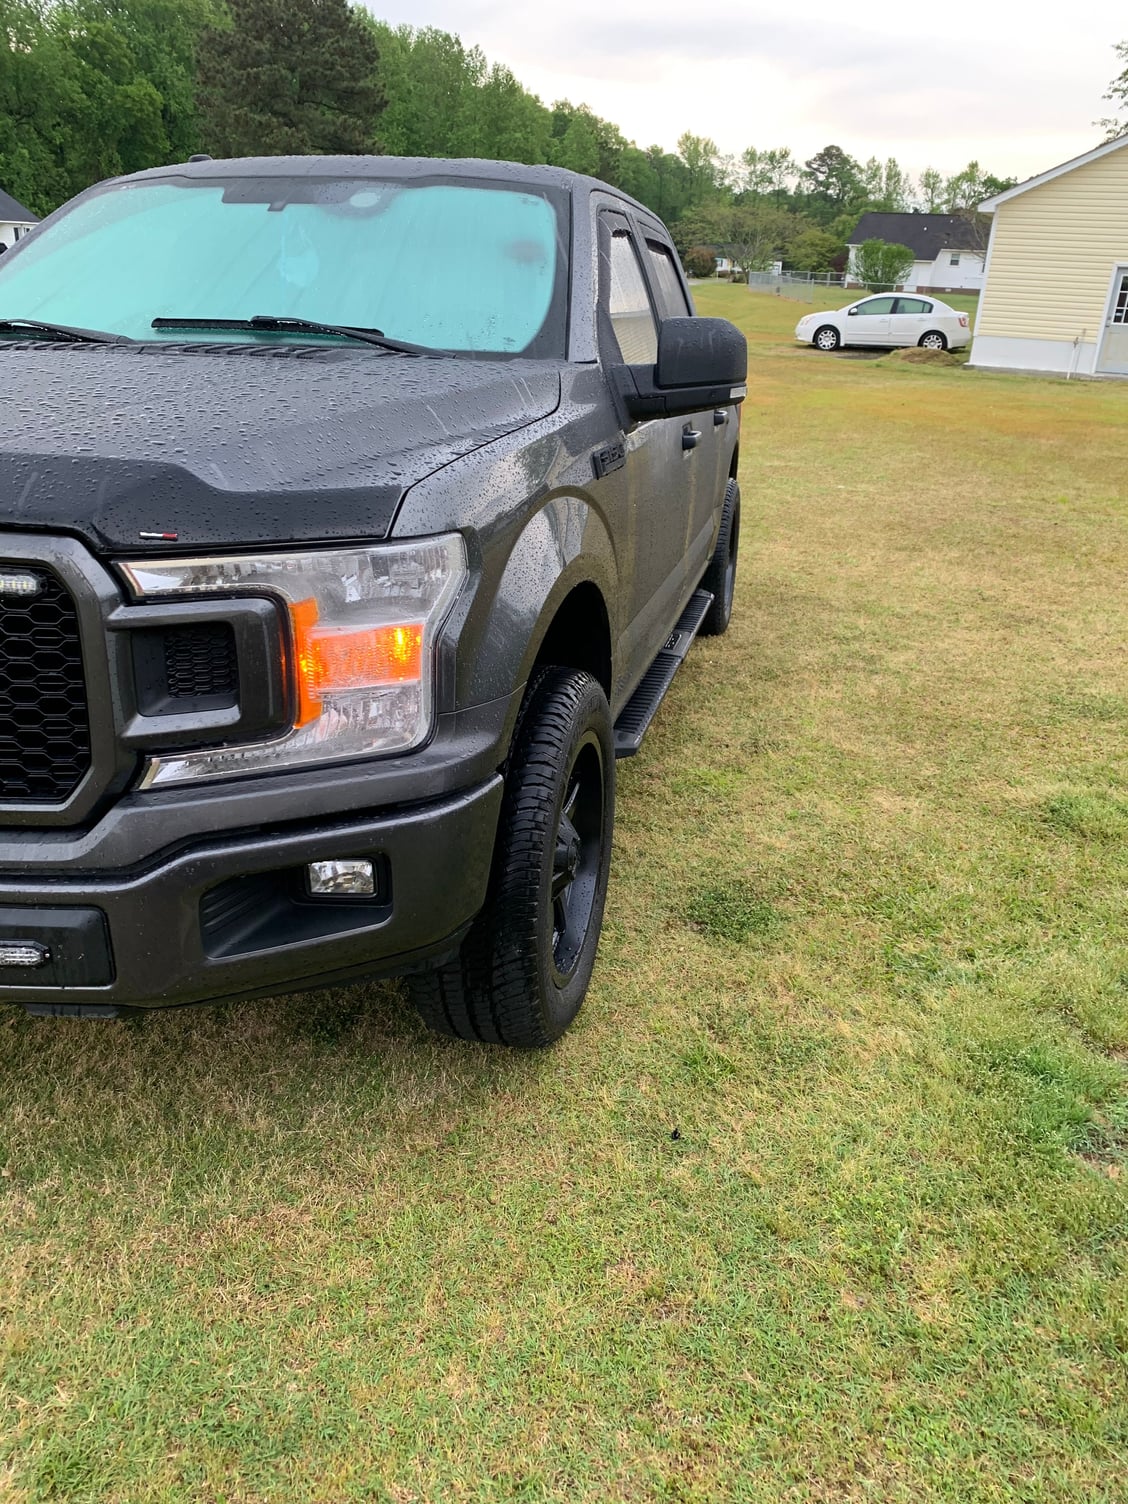 can a stock 2004 ford f150 fit 20 inch rims and tires